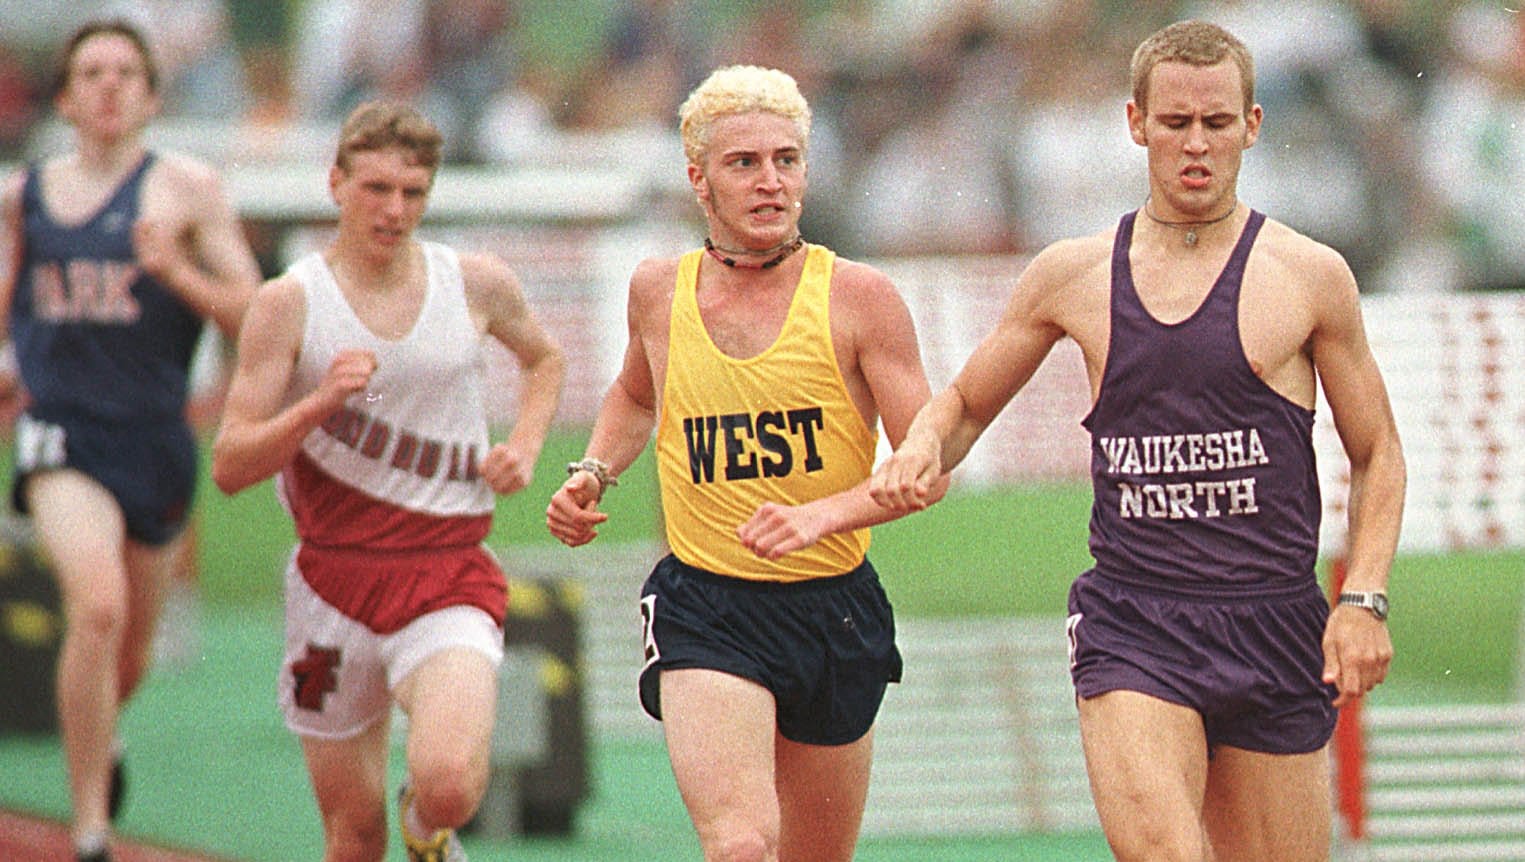 While a senior at Waukesha North High School, Nick Viall led the men to the finish line in the boys' 800-meter run at the June meeting.